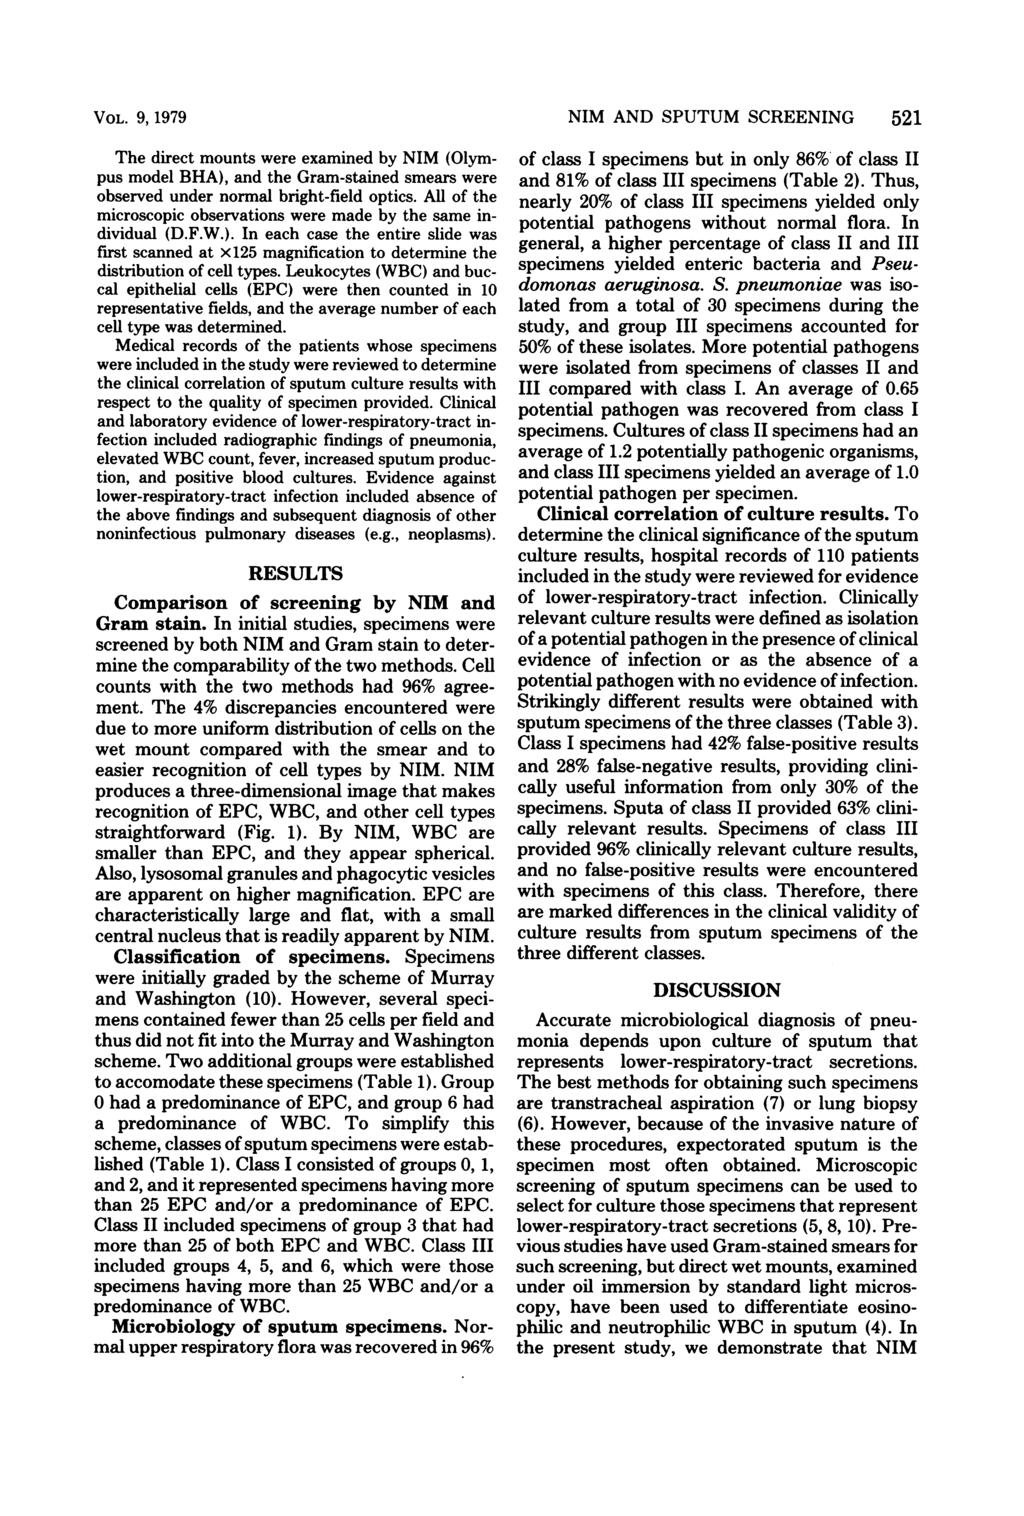 VOL. 9, 1979 The direct mounts were examined by NIM (Olympus model BHA), and the Gram-stained smears were observed under normal bright-field optics.